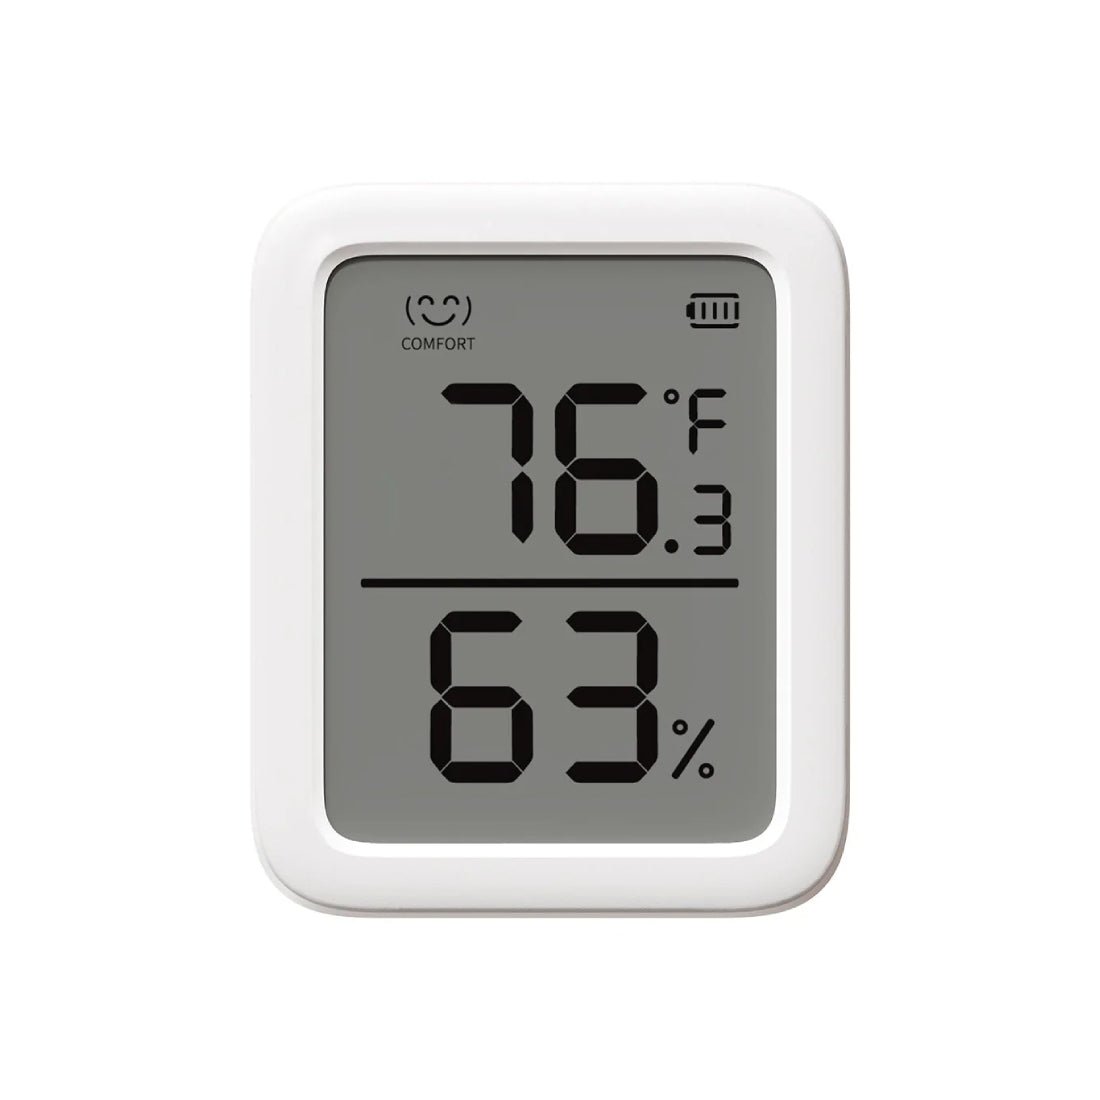 SwitchBot Meter Plus Temperature and Humidity Sensor - White - Store 974 | ستور ٩٧٤